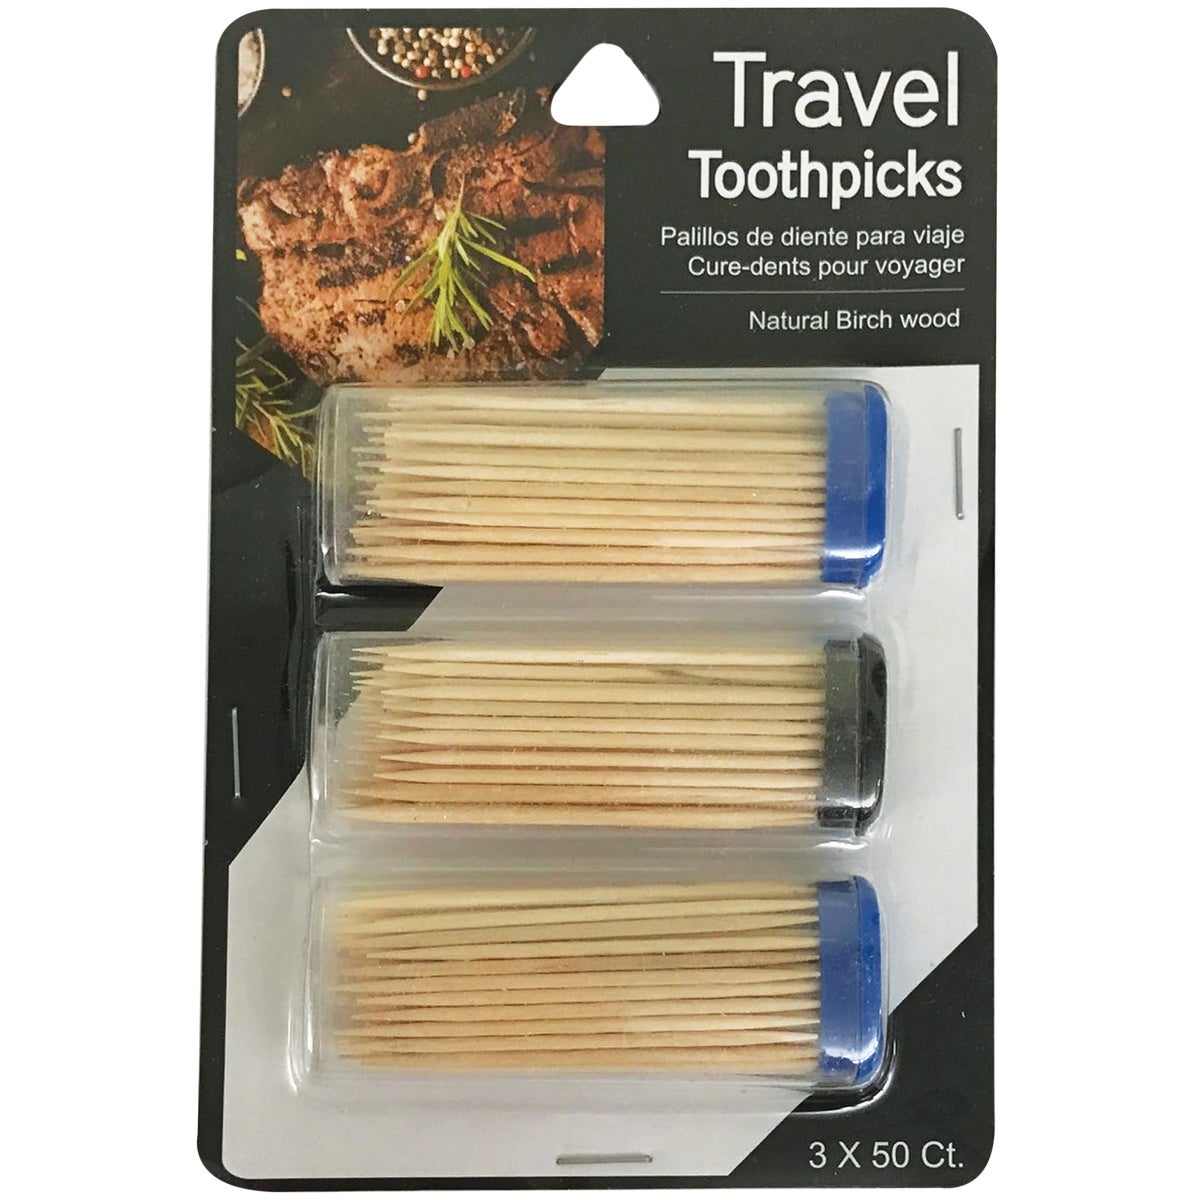 Item 970032, Travel toothpicks in convenient plastic, refillable containers with lids.